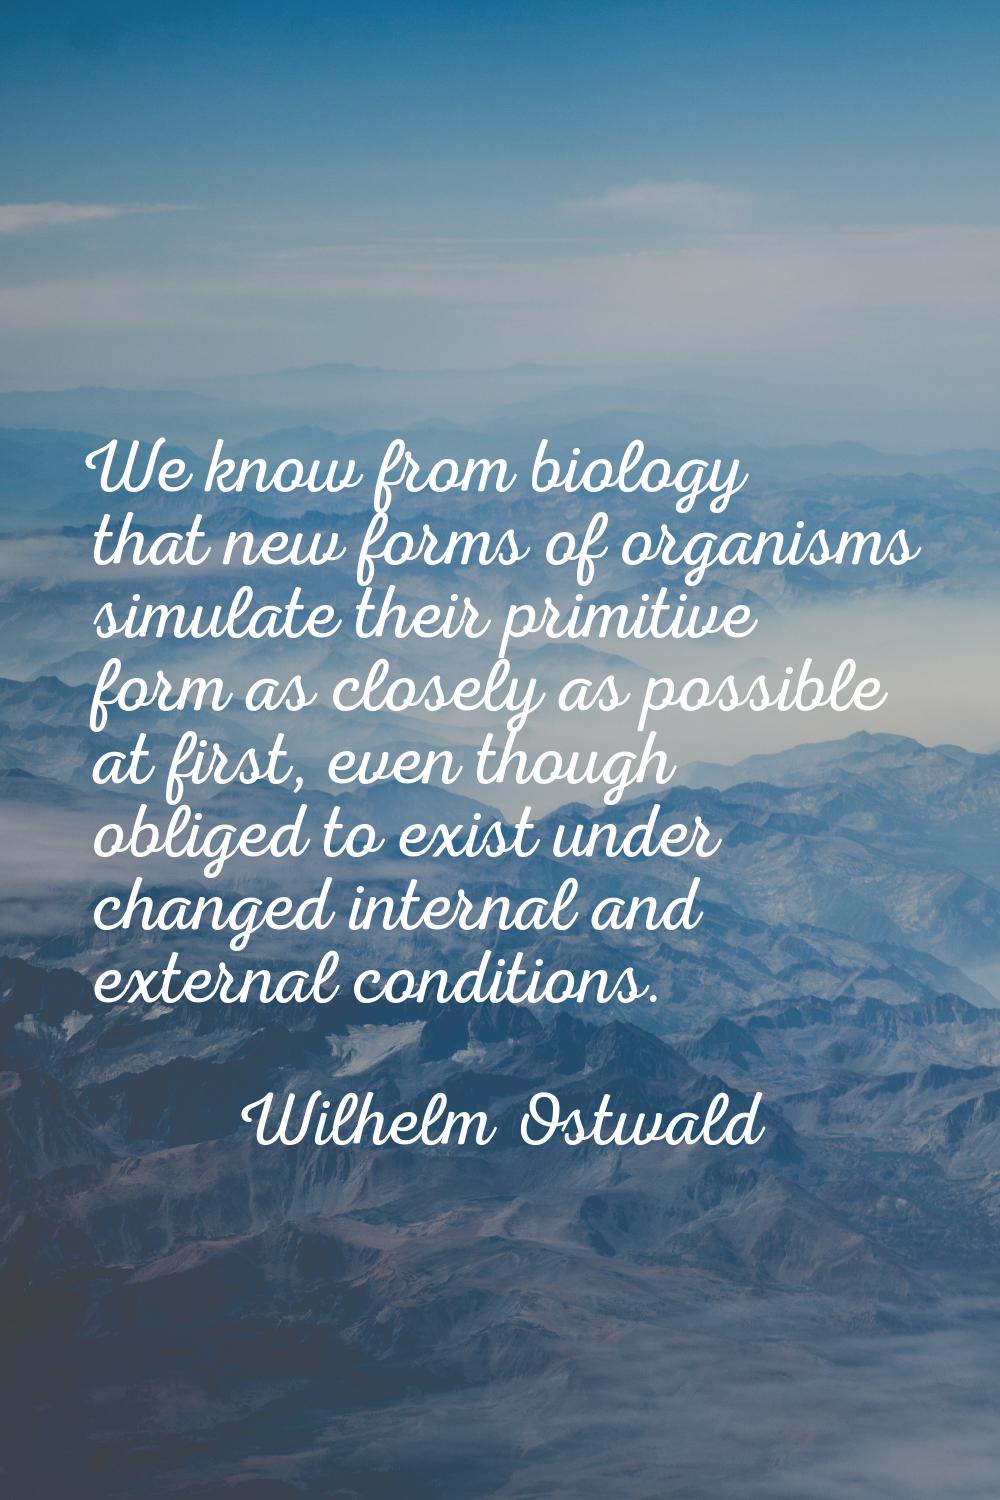 We know from biology that new forms of organisms simulate their primitive form as closely as possib